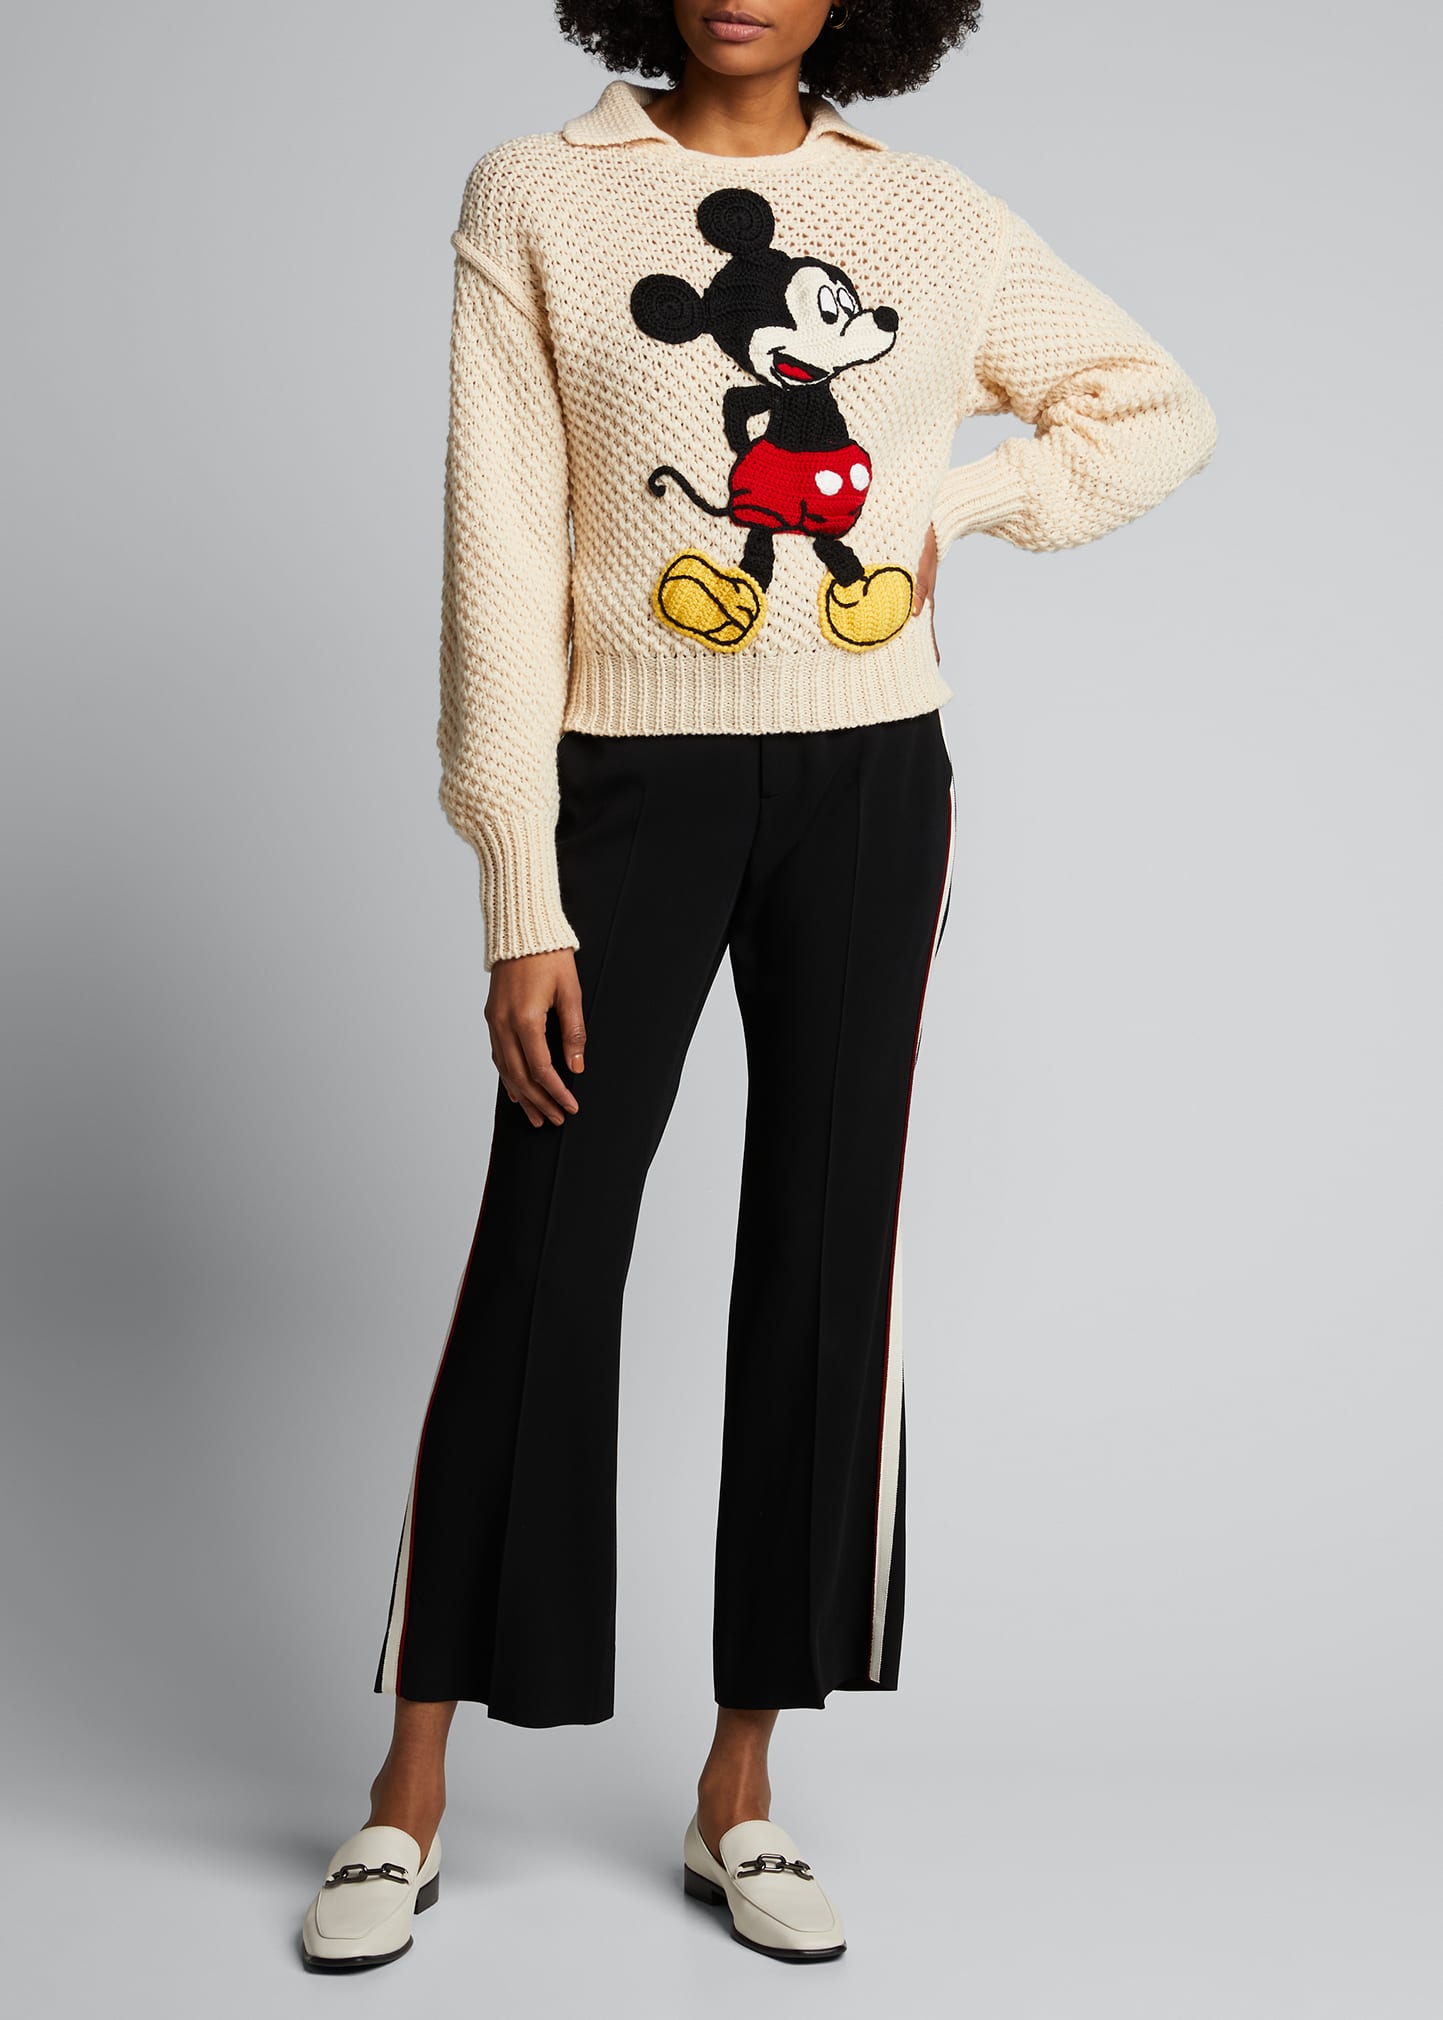 Gucci Mickey Mouse Knit Pullover Sweater and Matching Items